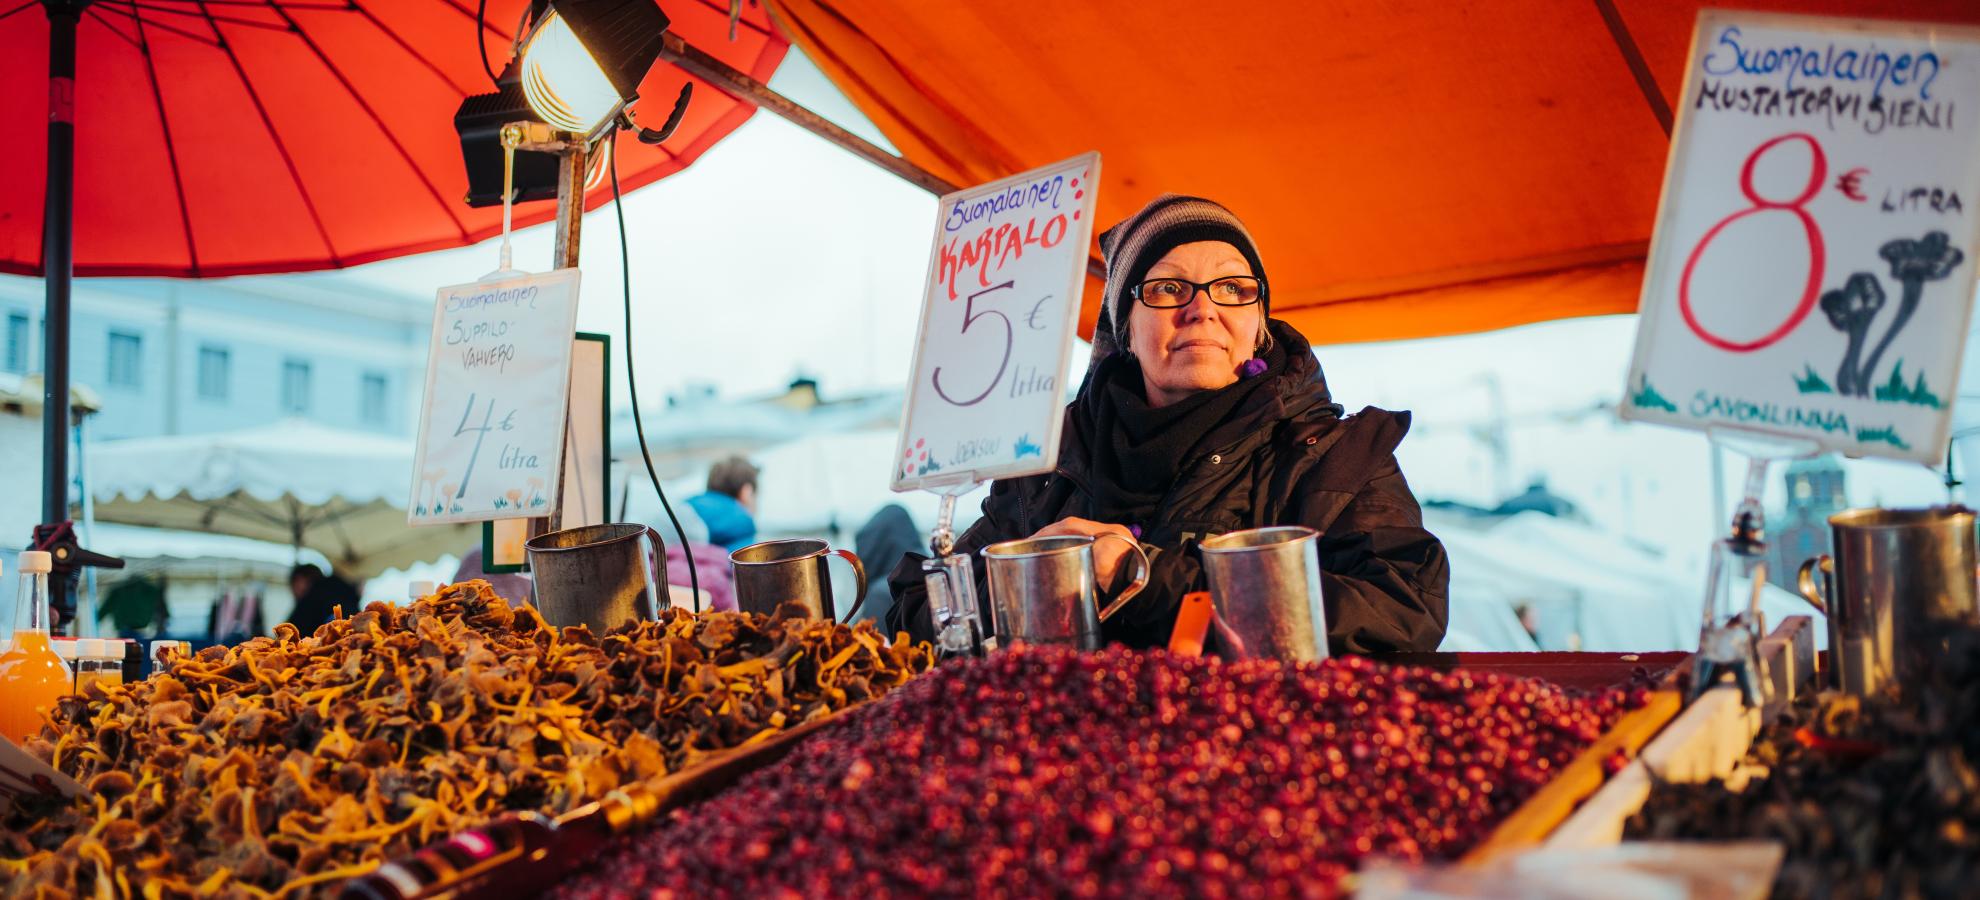 Underneath an orange market stall canopy, a woman dressed in a black coat, hat and looking to the right of the photo stands behind her sales counter, which is raised at a slight angle, and is packed full of cranberries and Chanterelle mushrooms. 